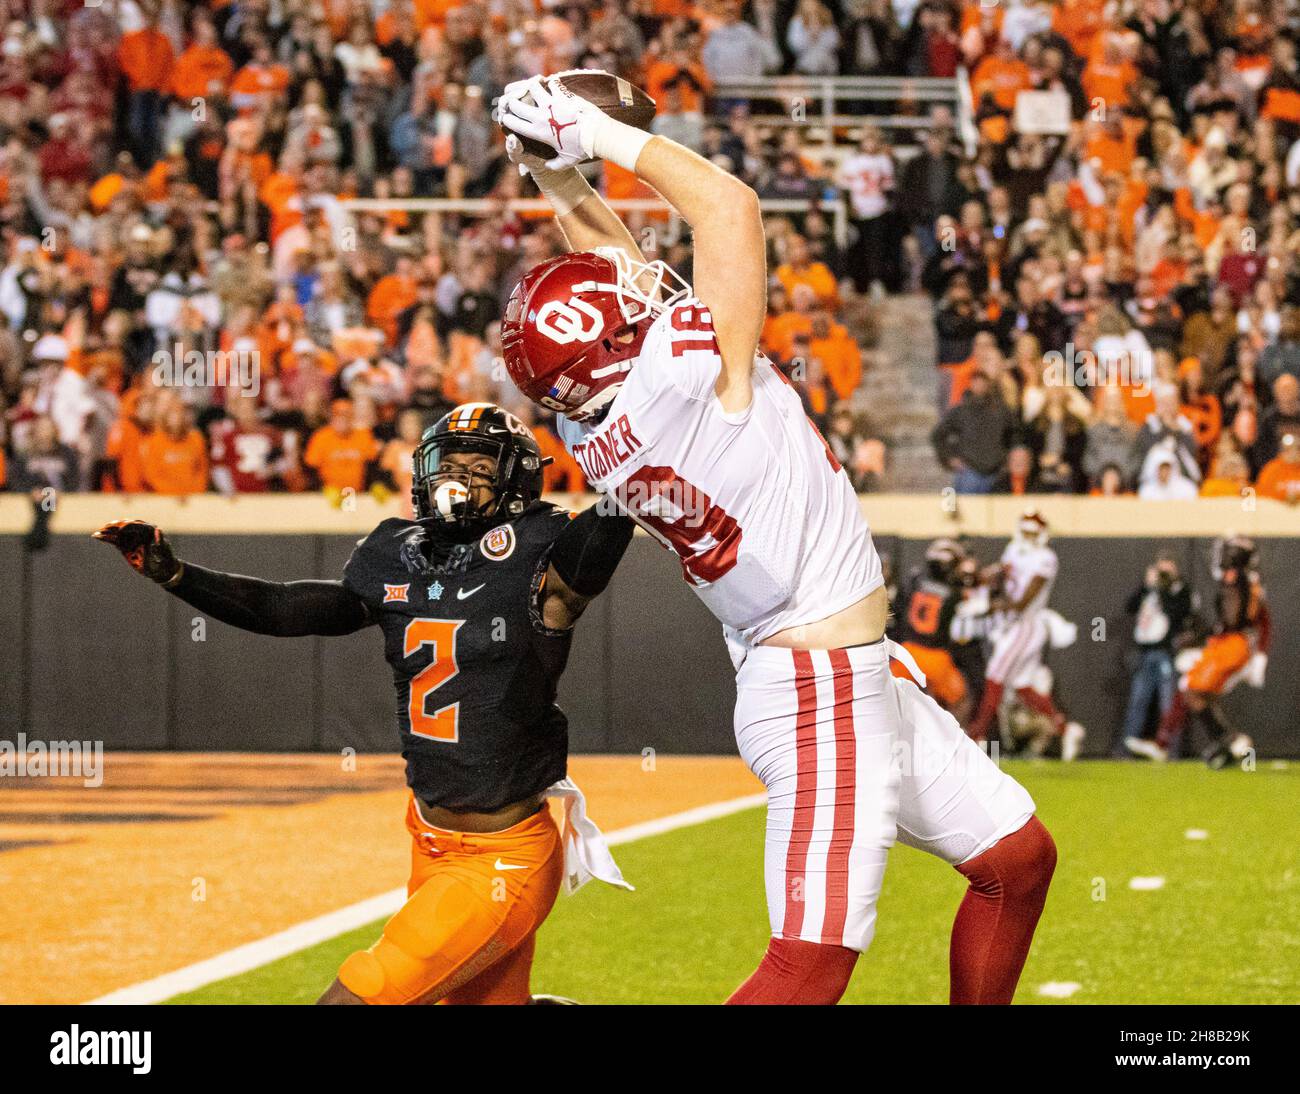 Stillwater, Oklahoma, USA. 27th Nov, 2021. Oklahoma Sooners tight end Austin Stogner (18) catching the football before falling into the endzone for a Sooners touchdown during the game on Saturday, November 27, 2021 at Boone Pickens Stadium in Stillwater, Oklahoma. (Credit Image: © Nicholas Rutledge/ZUMA Press Wire) Stock Photo